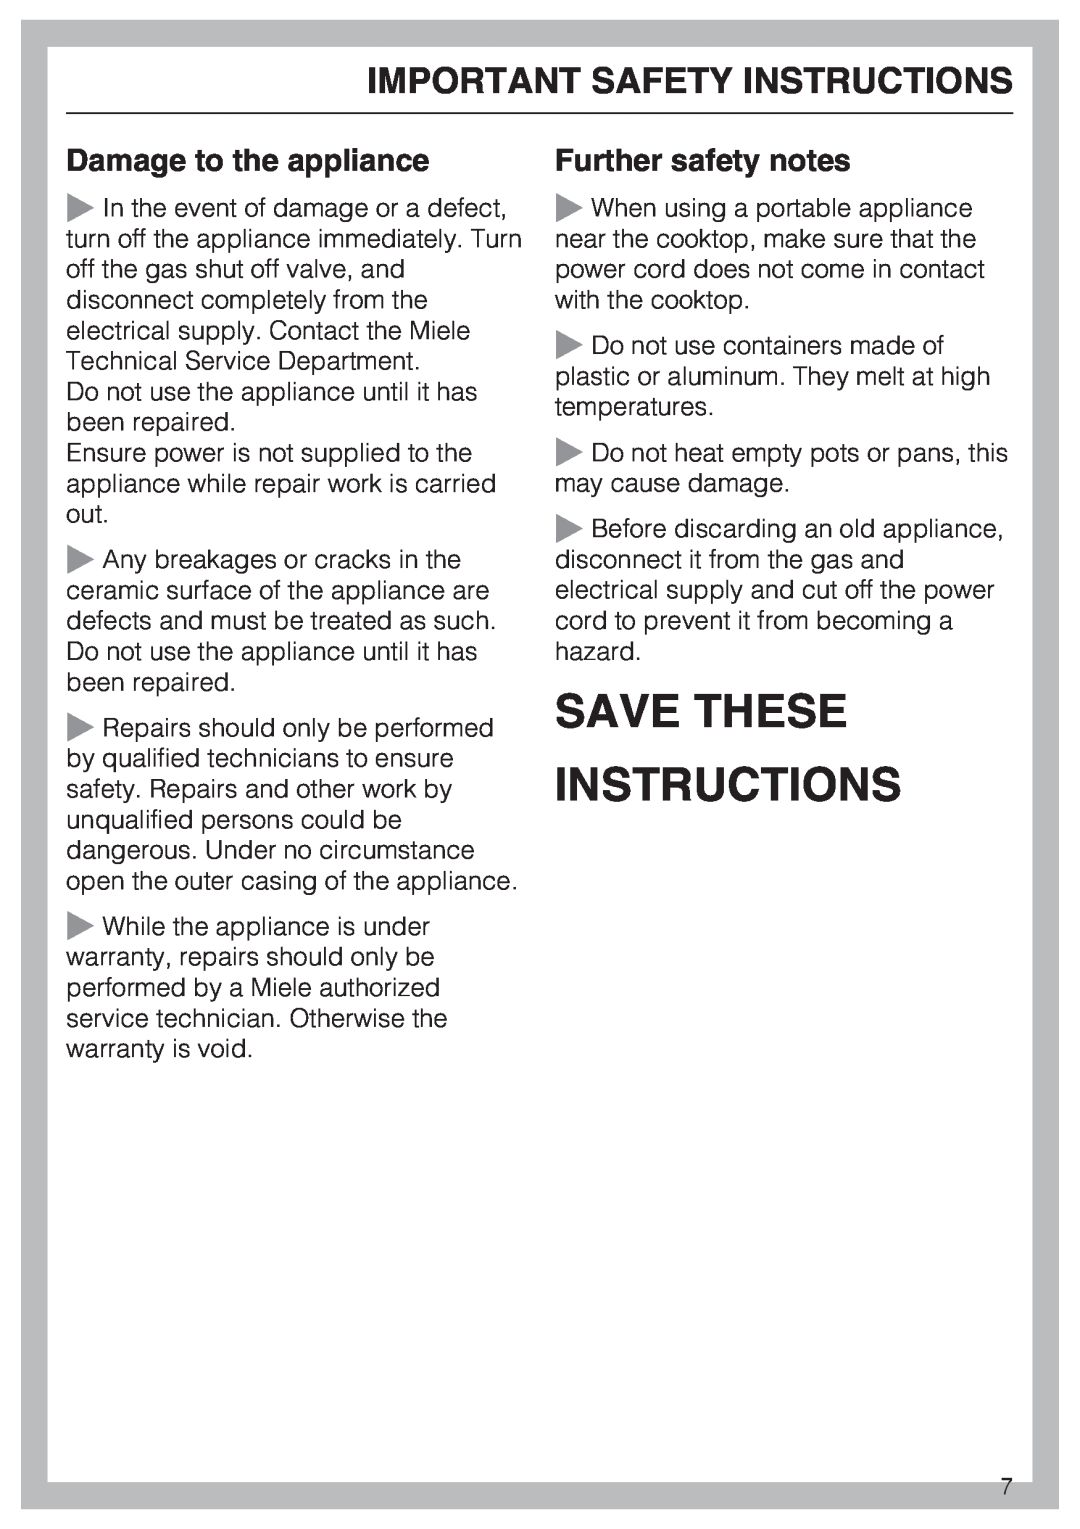 Miele KM 360 Damage to the appliance, Further safety notes, Save These Instructions, Important Safety Instructions 